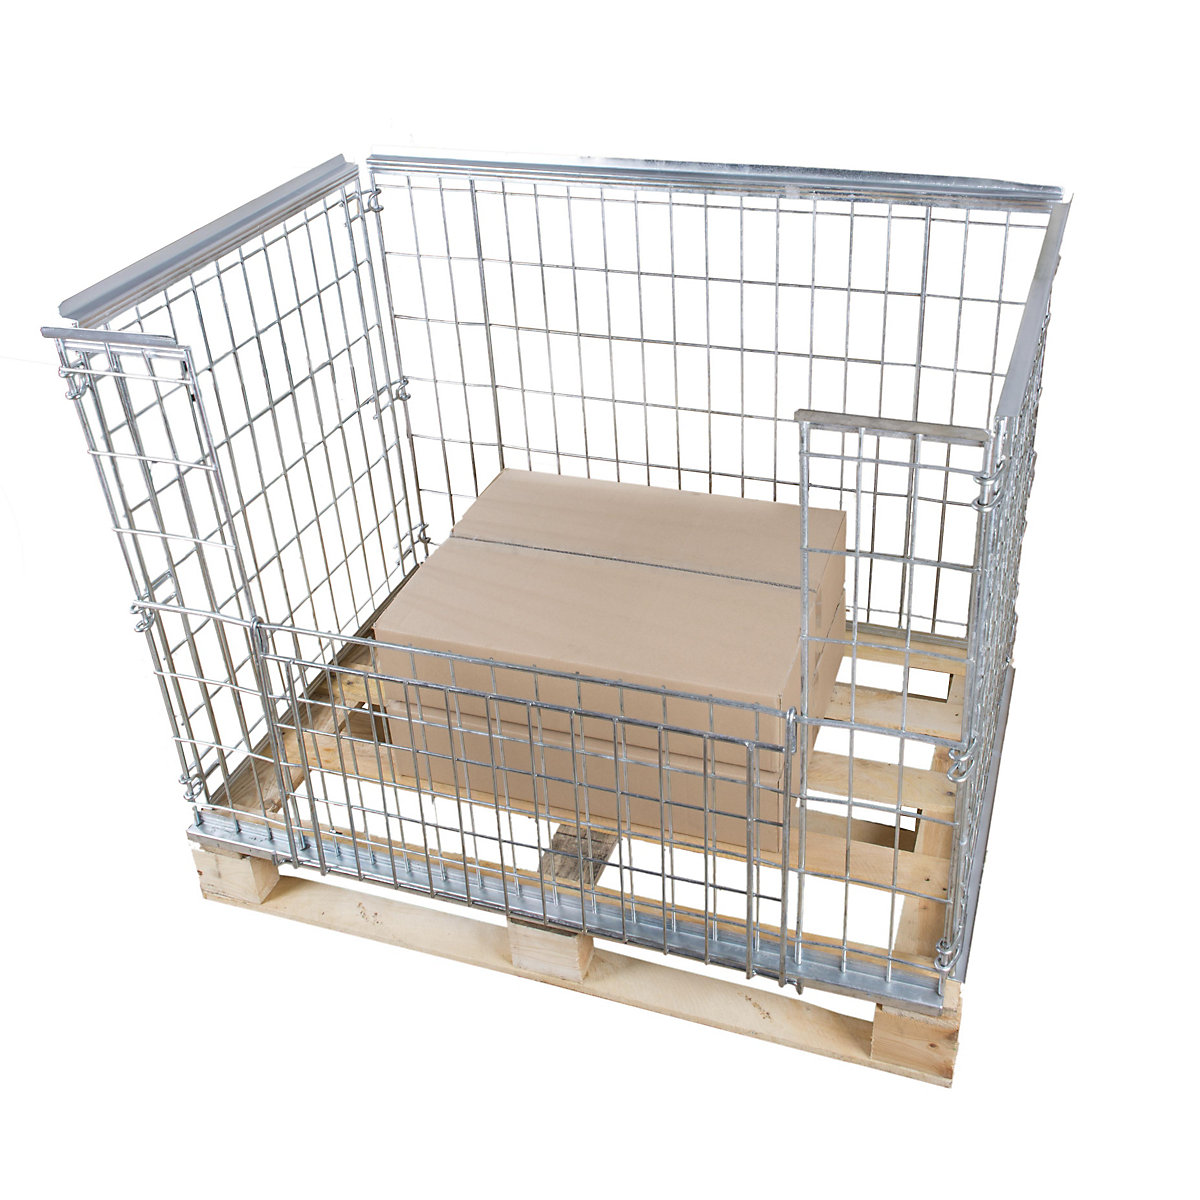 Mesh stacking frame for EURO pallet, with drop gate on 1 long side, effective height 1160 mm-1